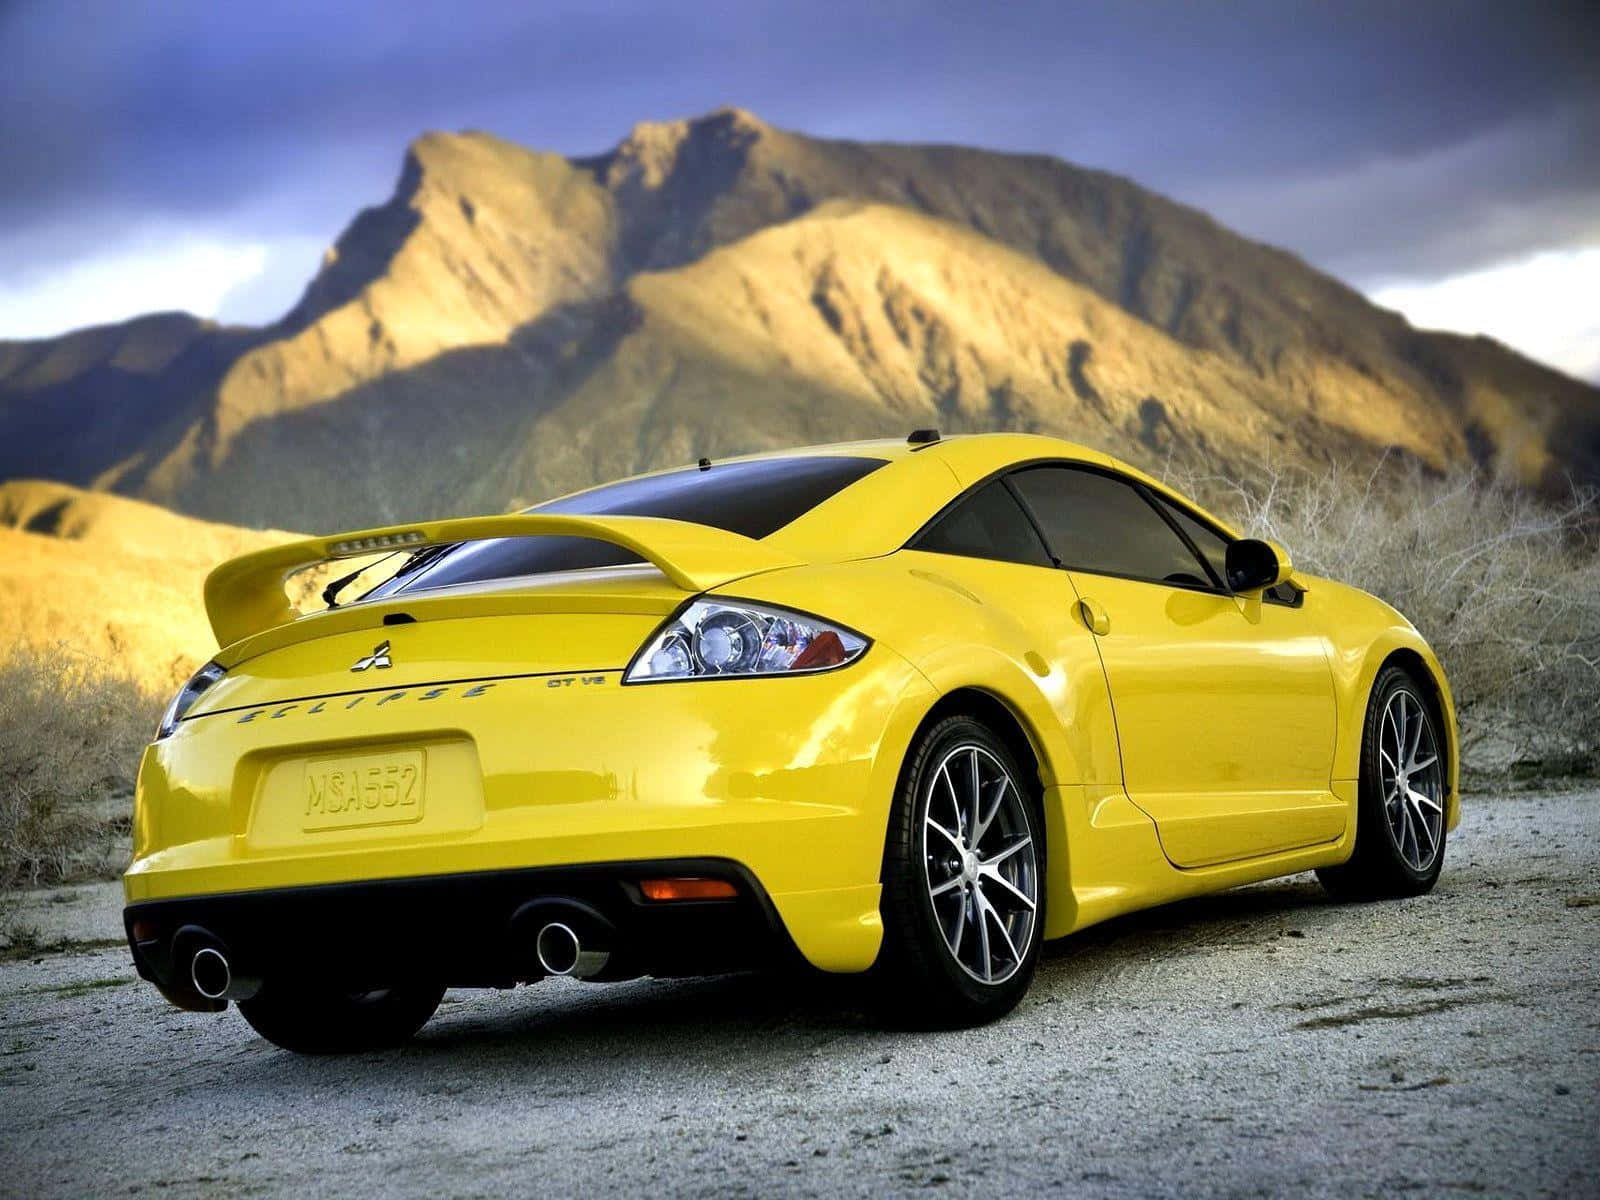 The Power Of Speed: Mitsubishi Eclipse Wallpaper